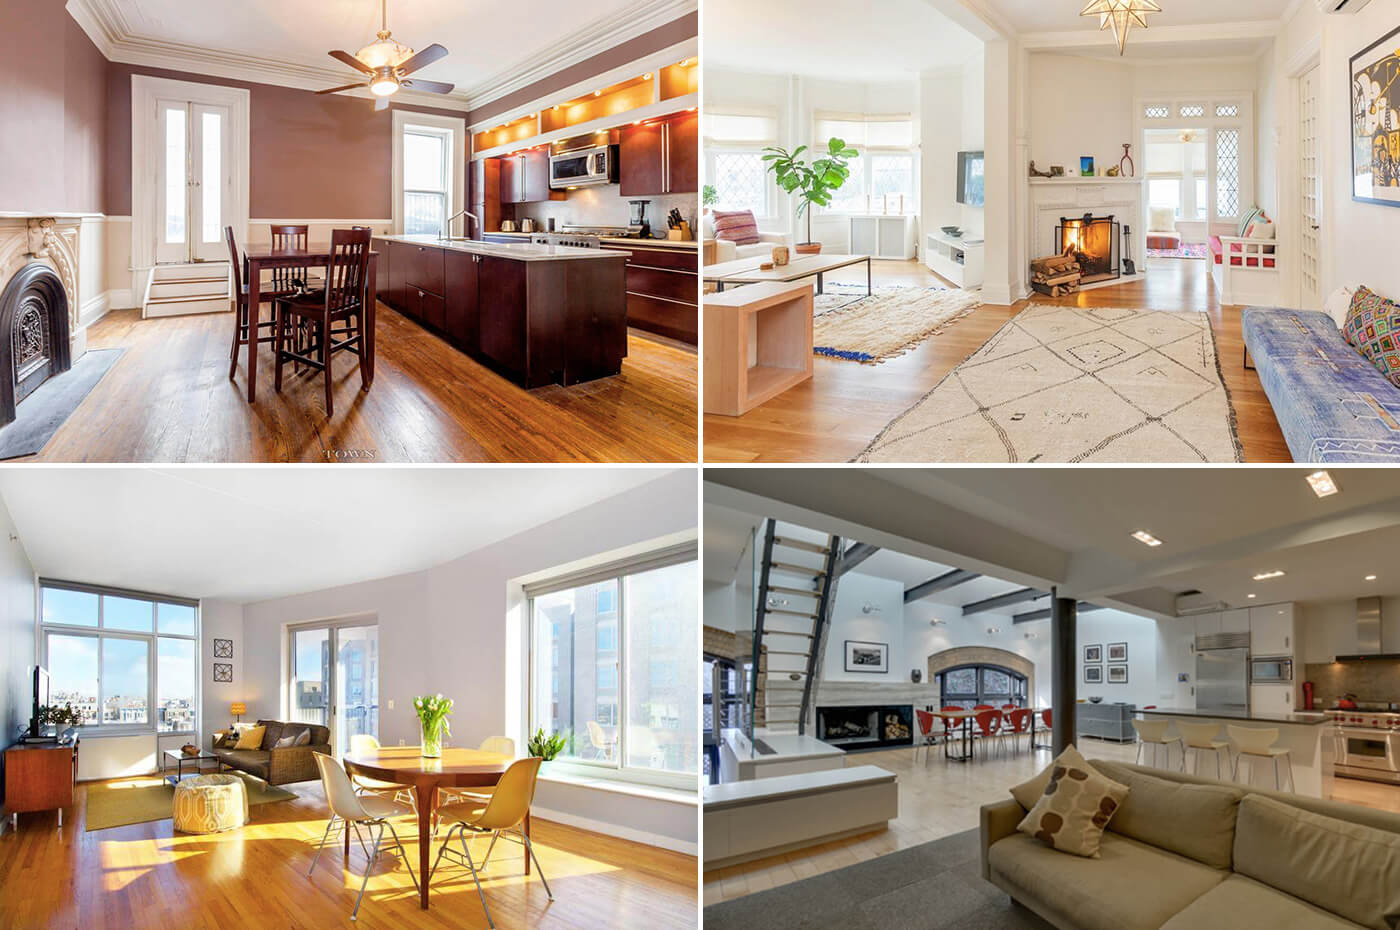 Brooklyn Homes for Sale Brooklyn Heights Fort Greene Crown Heights Prospect Park South